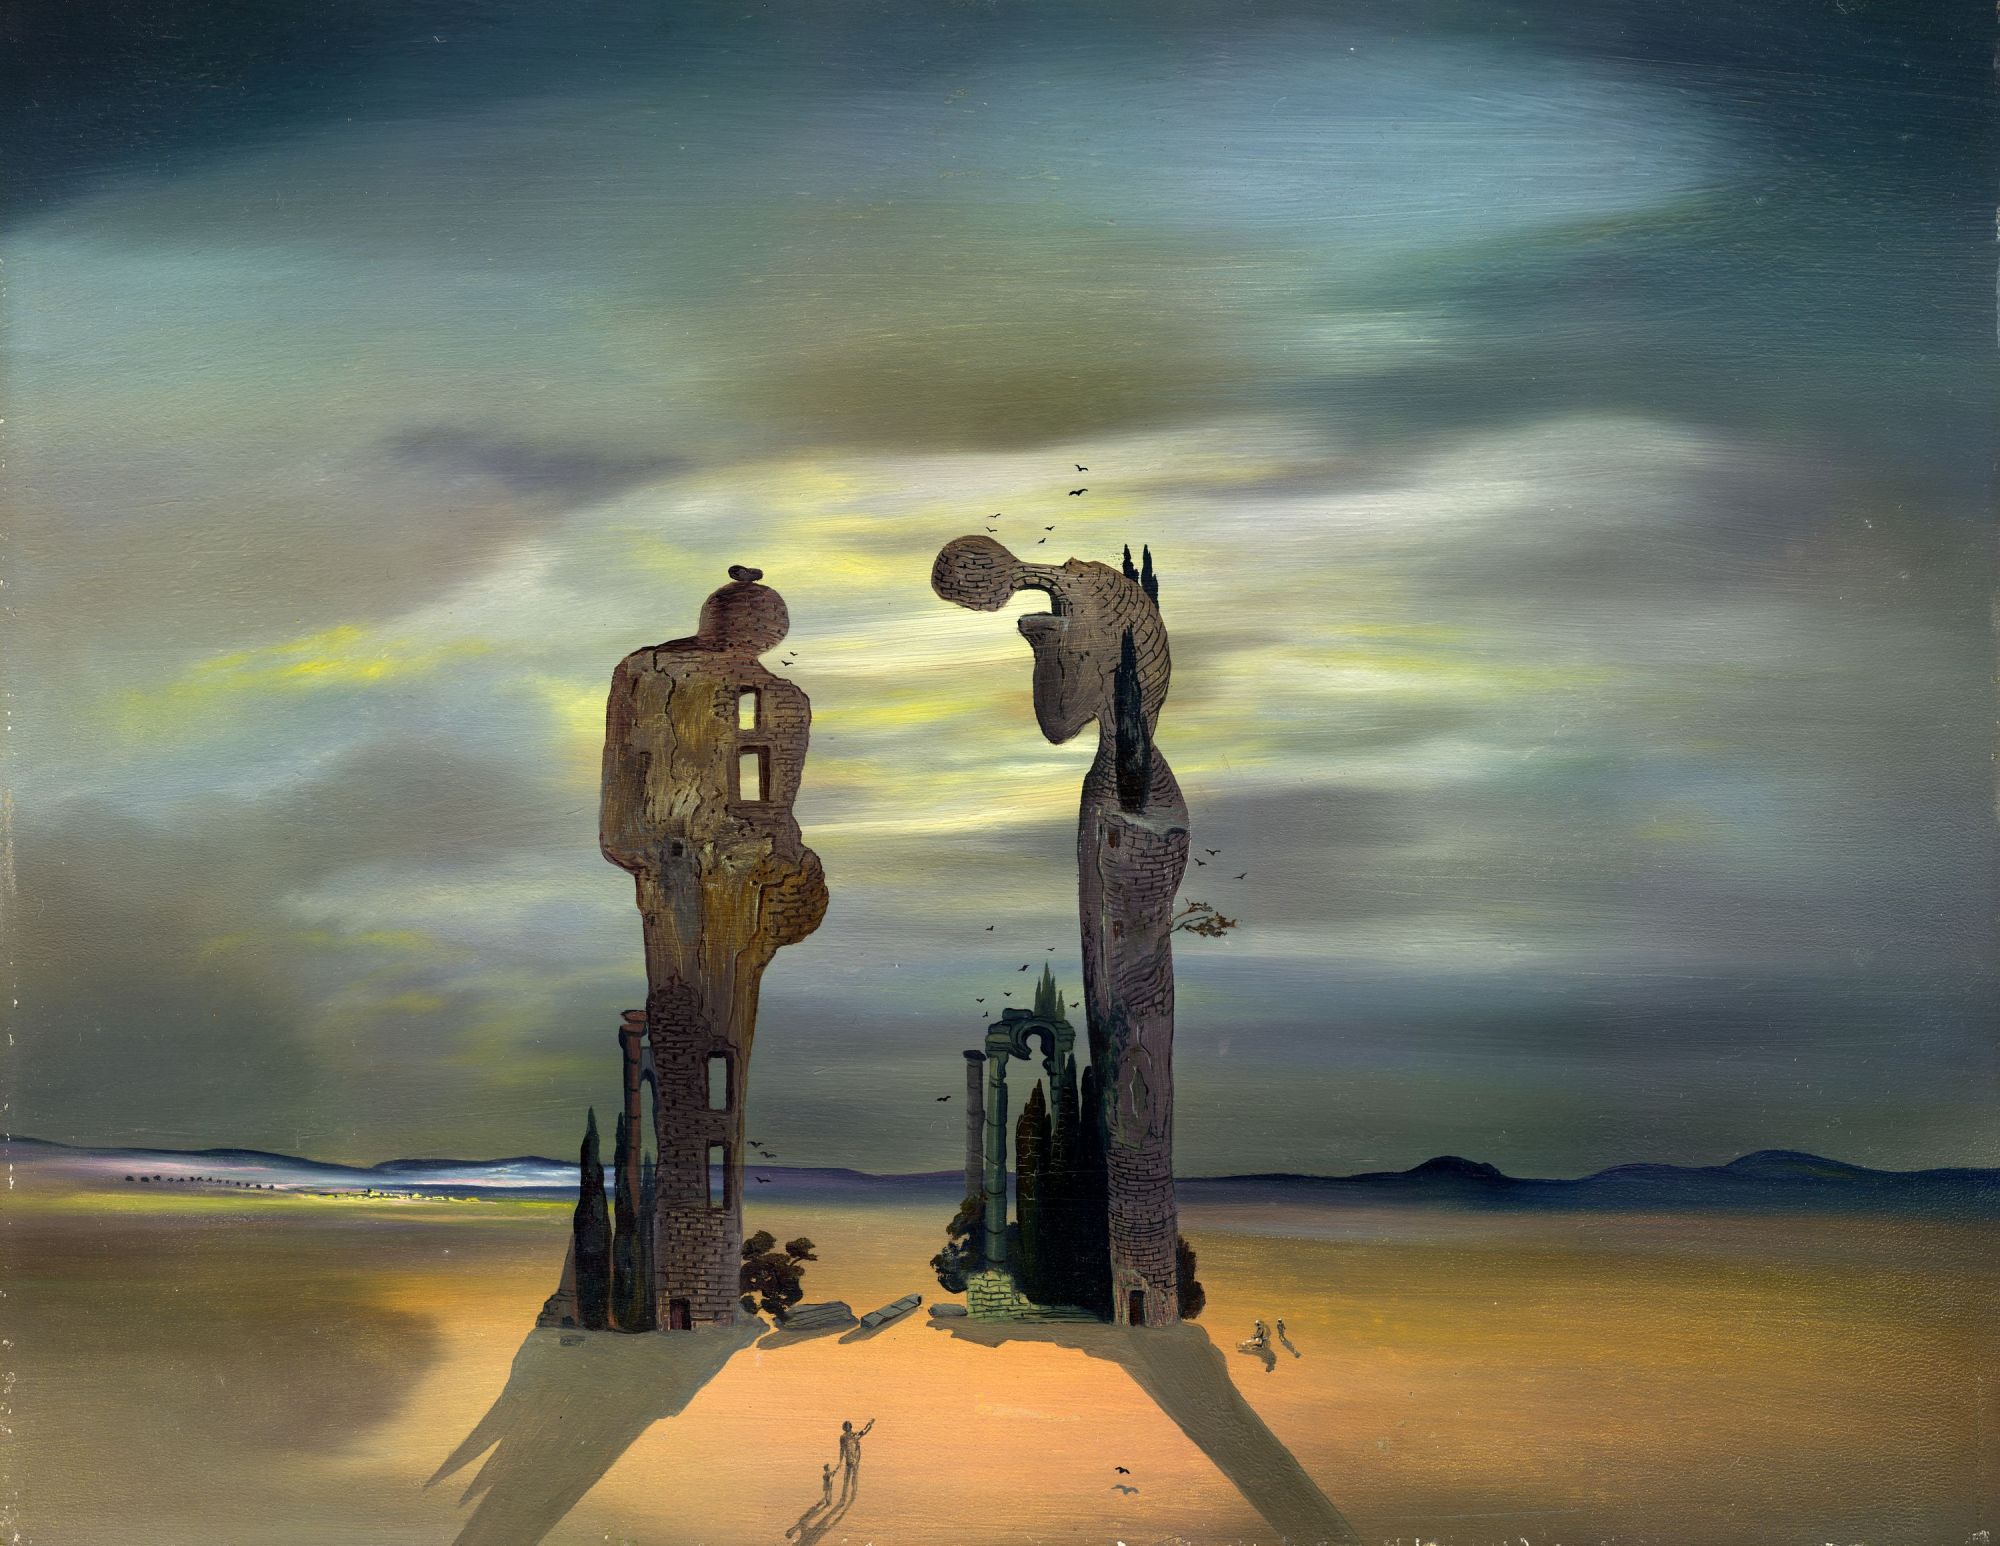 surrealist landscape with two tall figures standing on a sandy ground, with an ominous sky